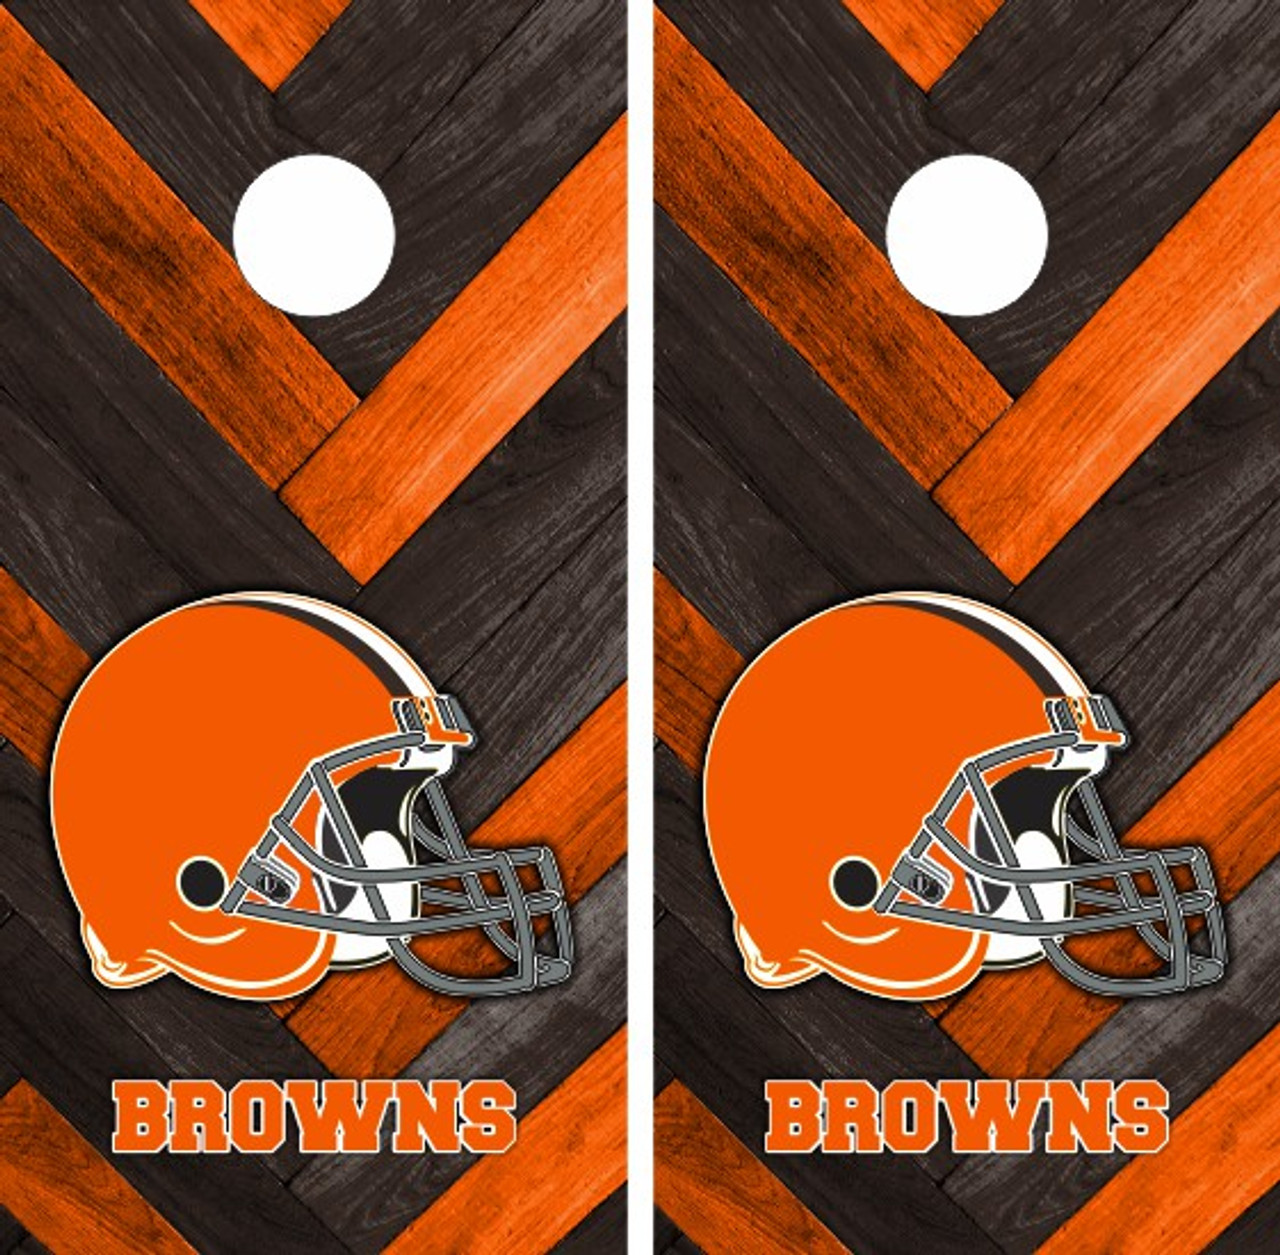 Cleveland Browns Alternating Wood Look Triangle Cornhole Boards - NFL